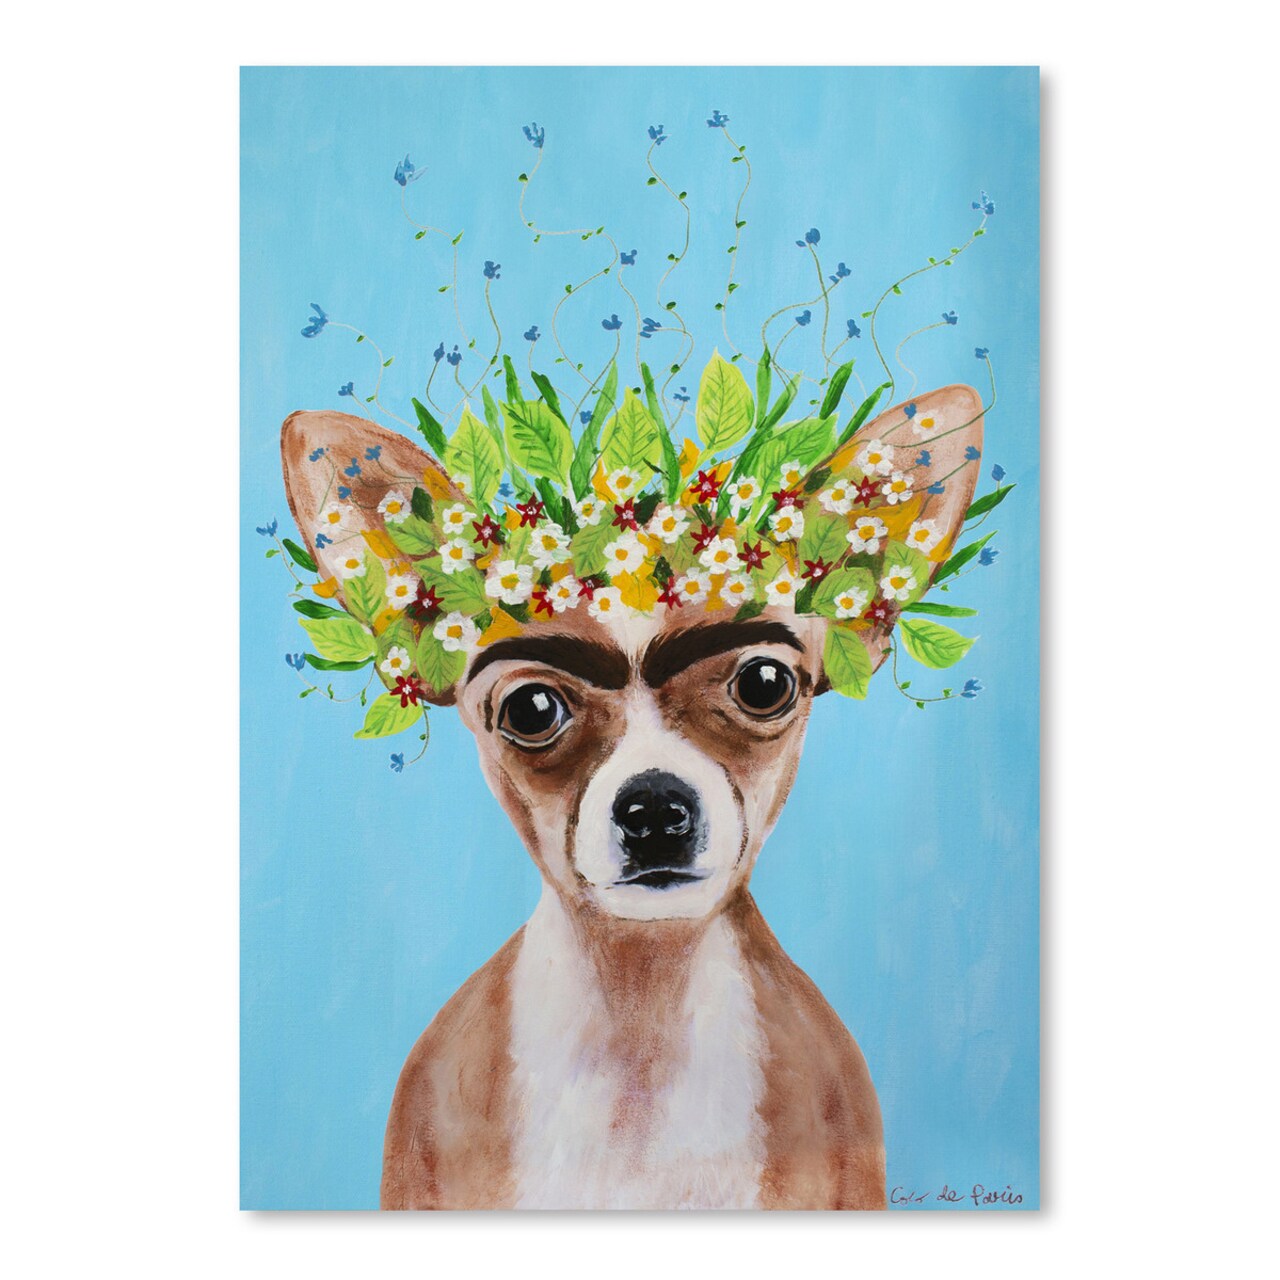 Chihuahua by Coco De Paris  Poster Art Print - Americanflat